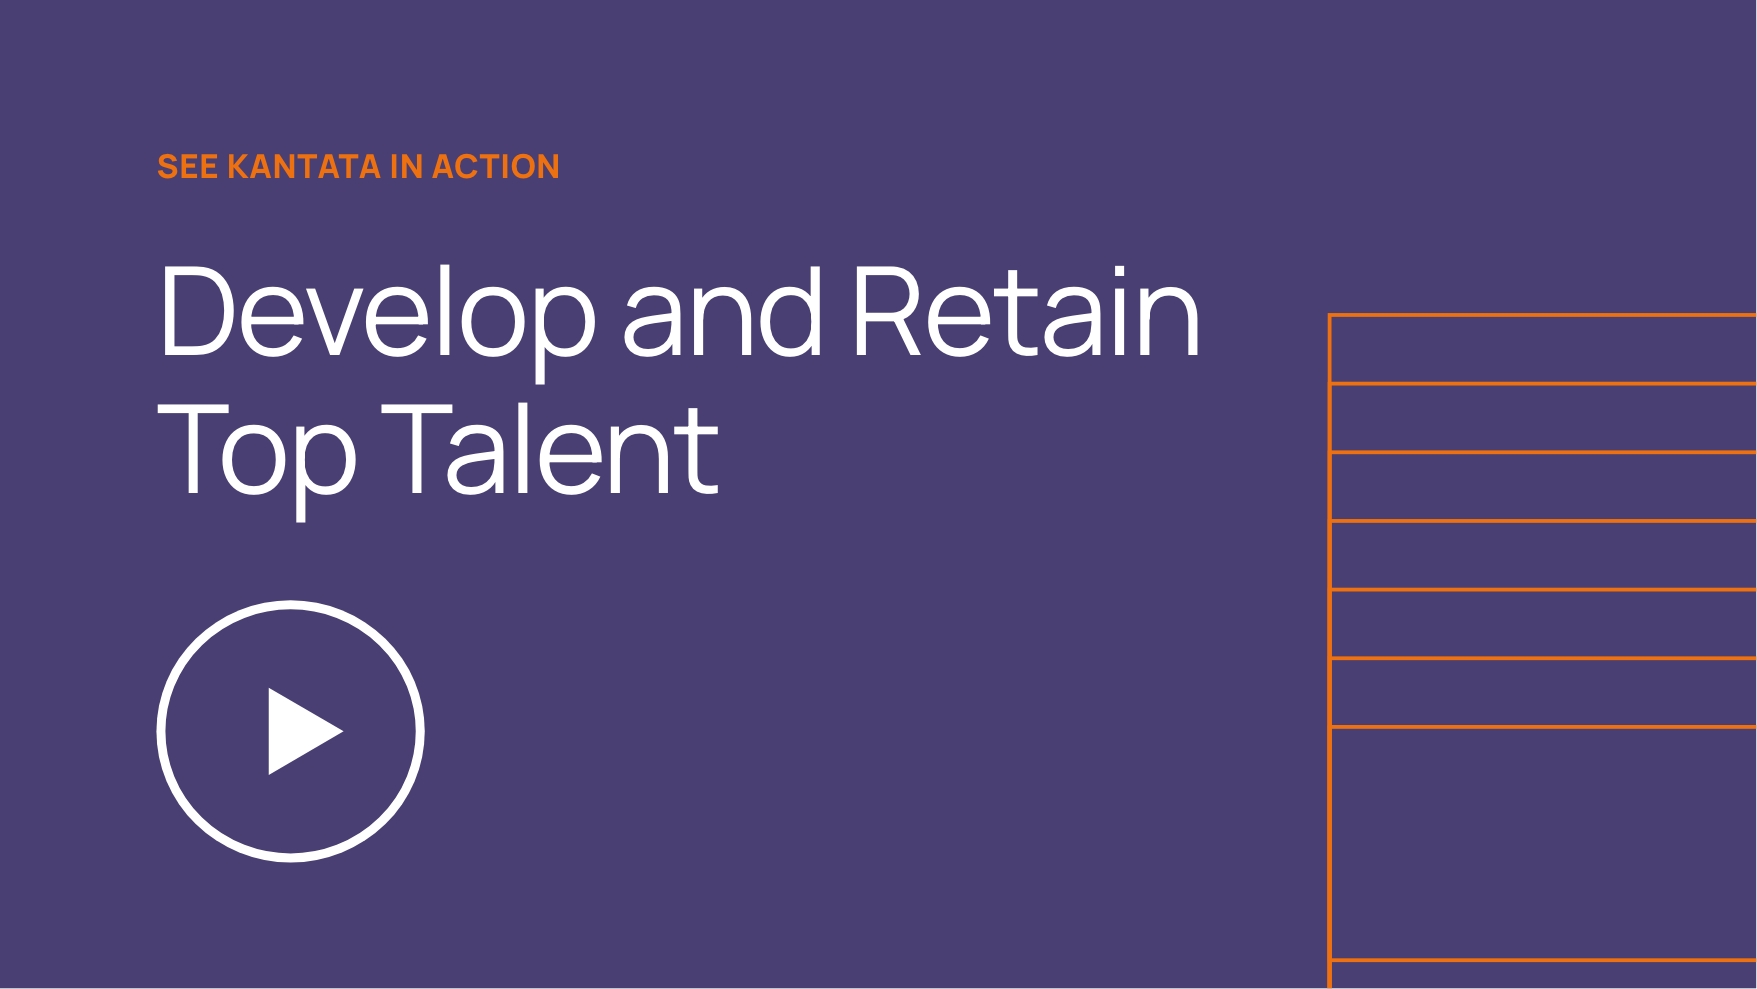 Keep talent happy and teams thriving